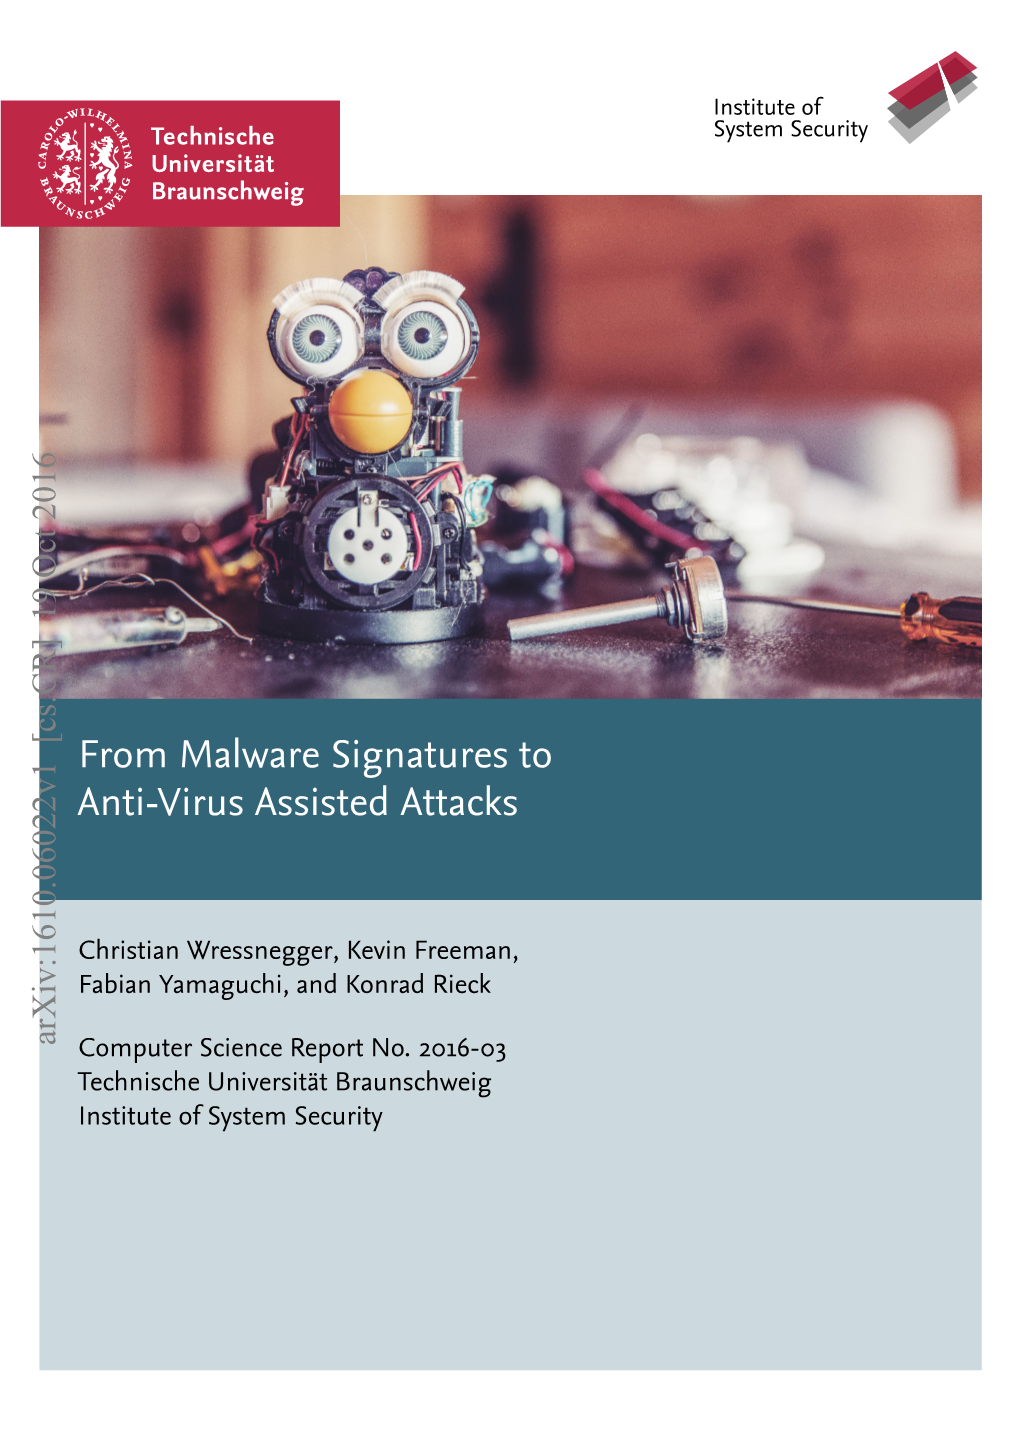 From Malware Signatures to Anti-Virus Assisted Attacks